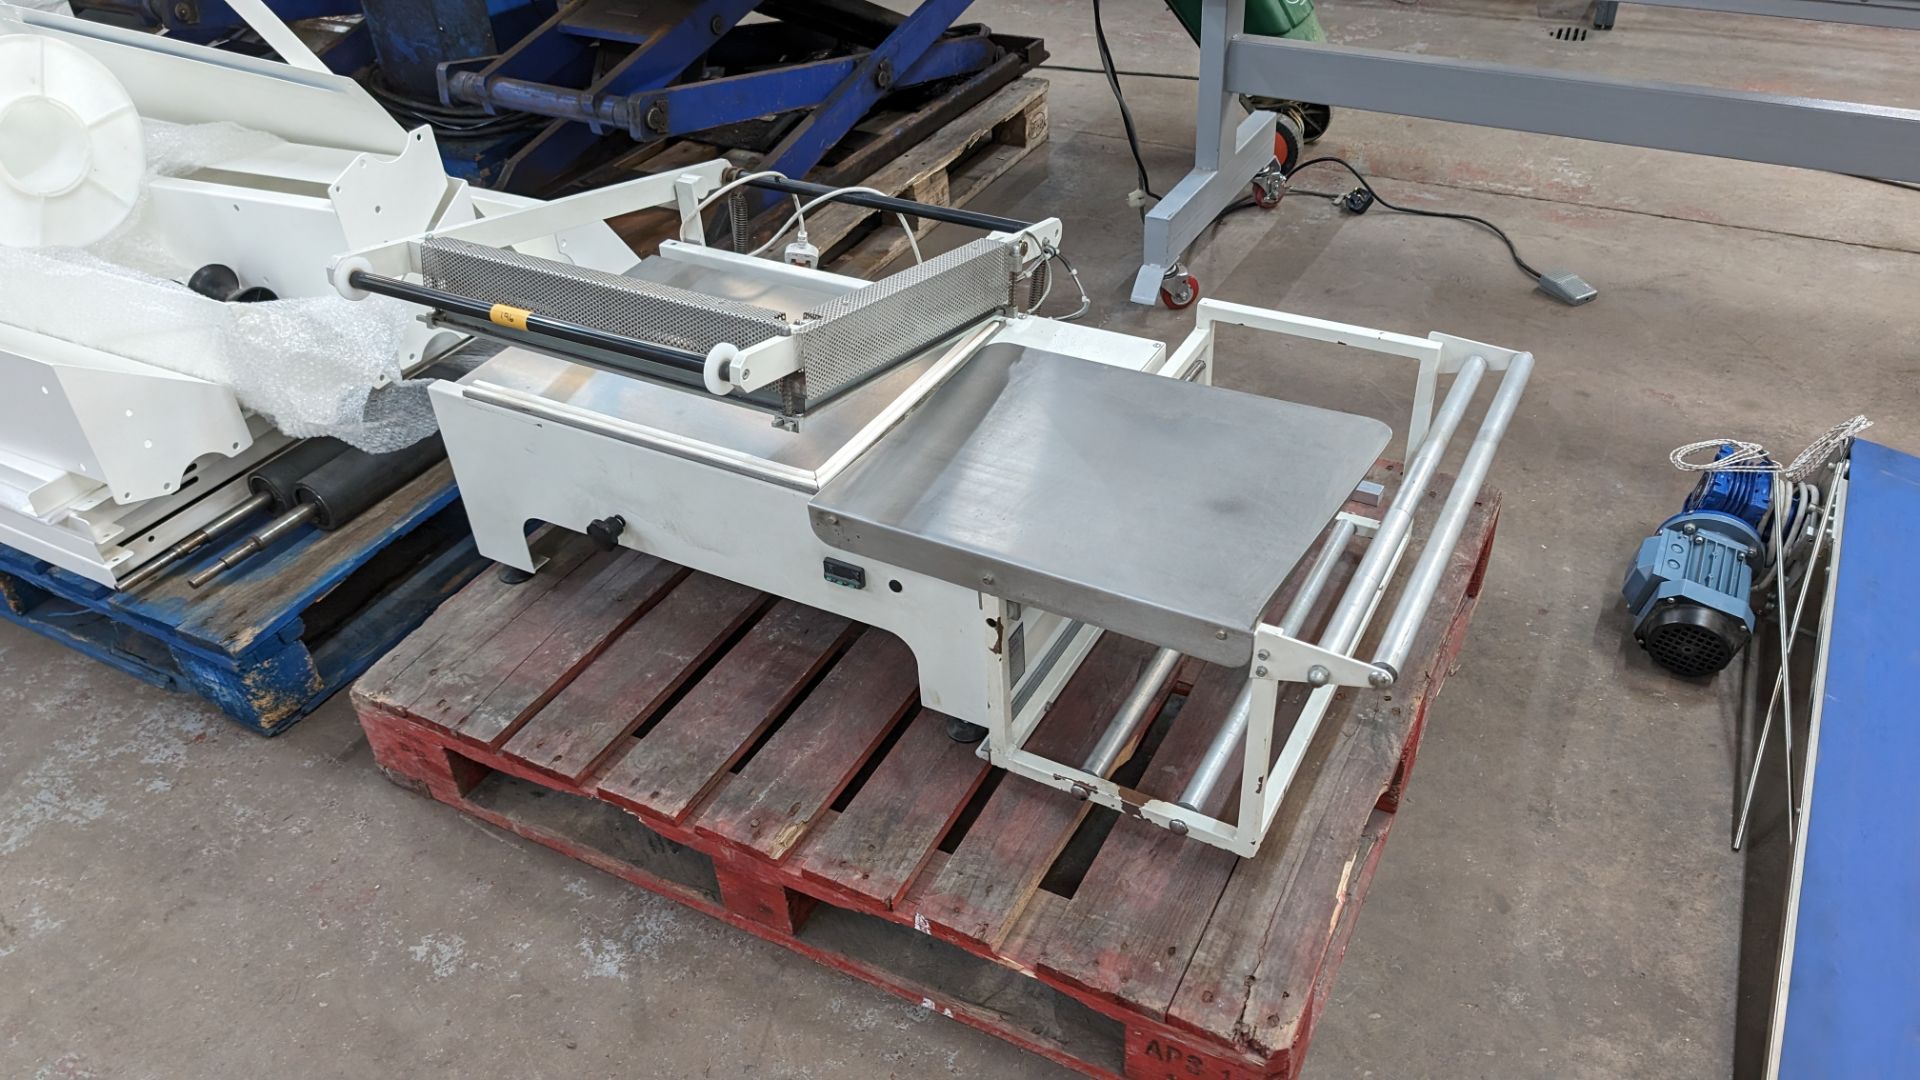 Packaging/shrink wrapping machine - possibly incomplete